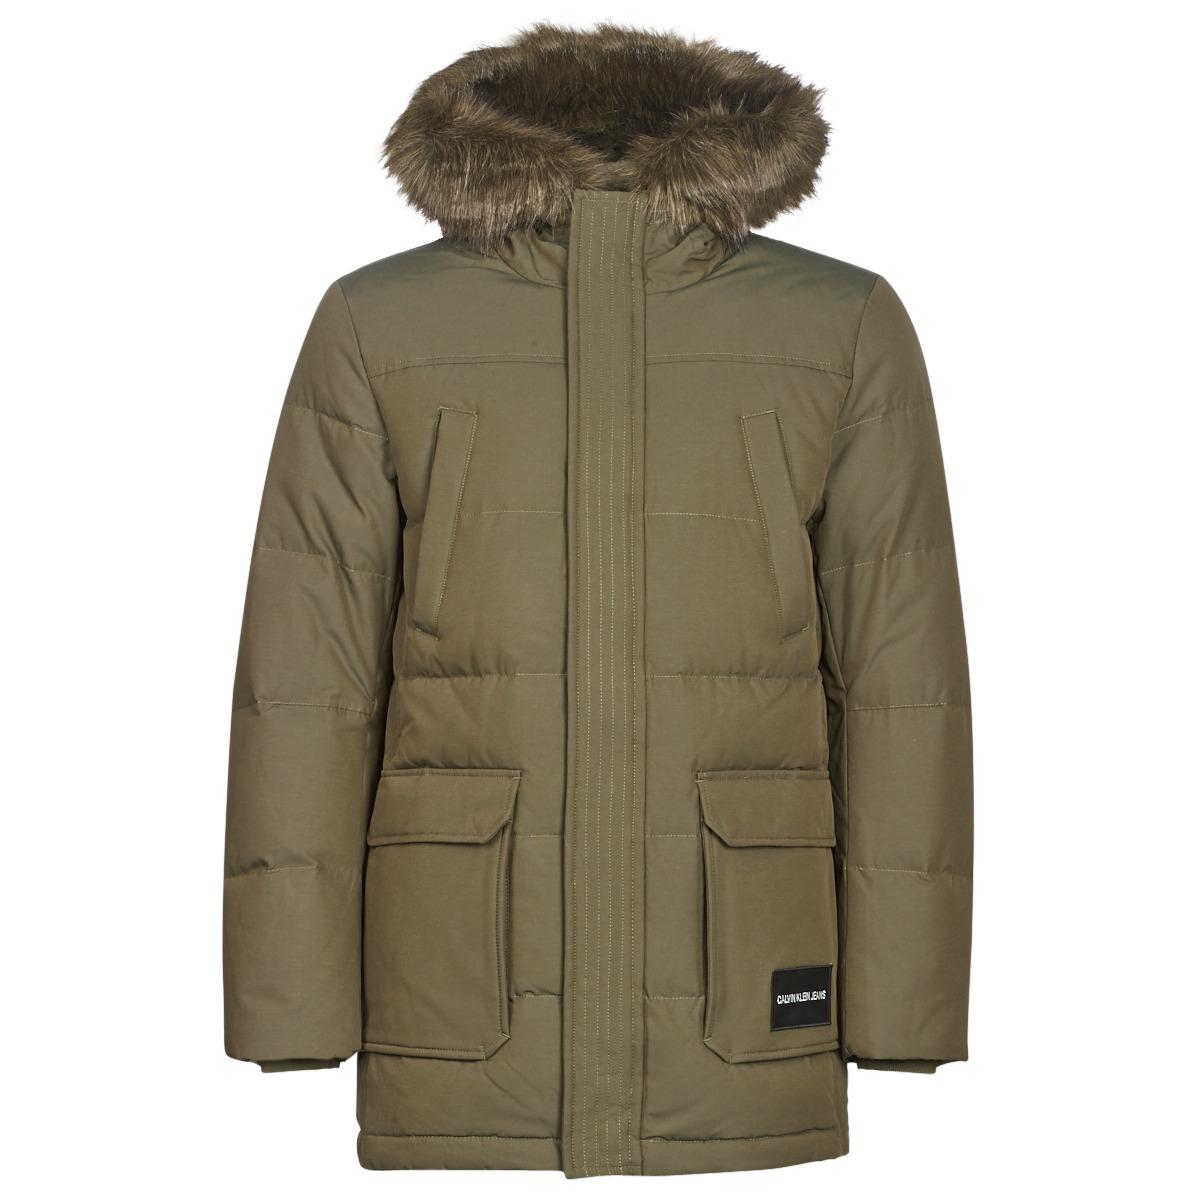 Calvin Klein Canvas Quilted Down Parka Jacket in Green for Men - Lyst